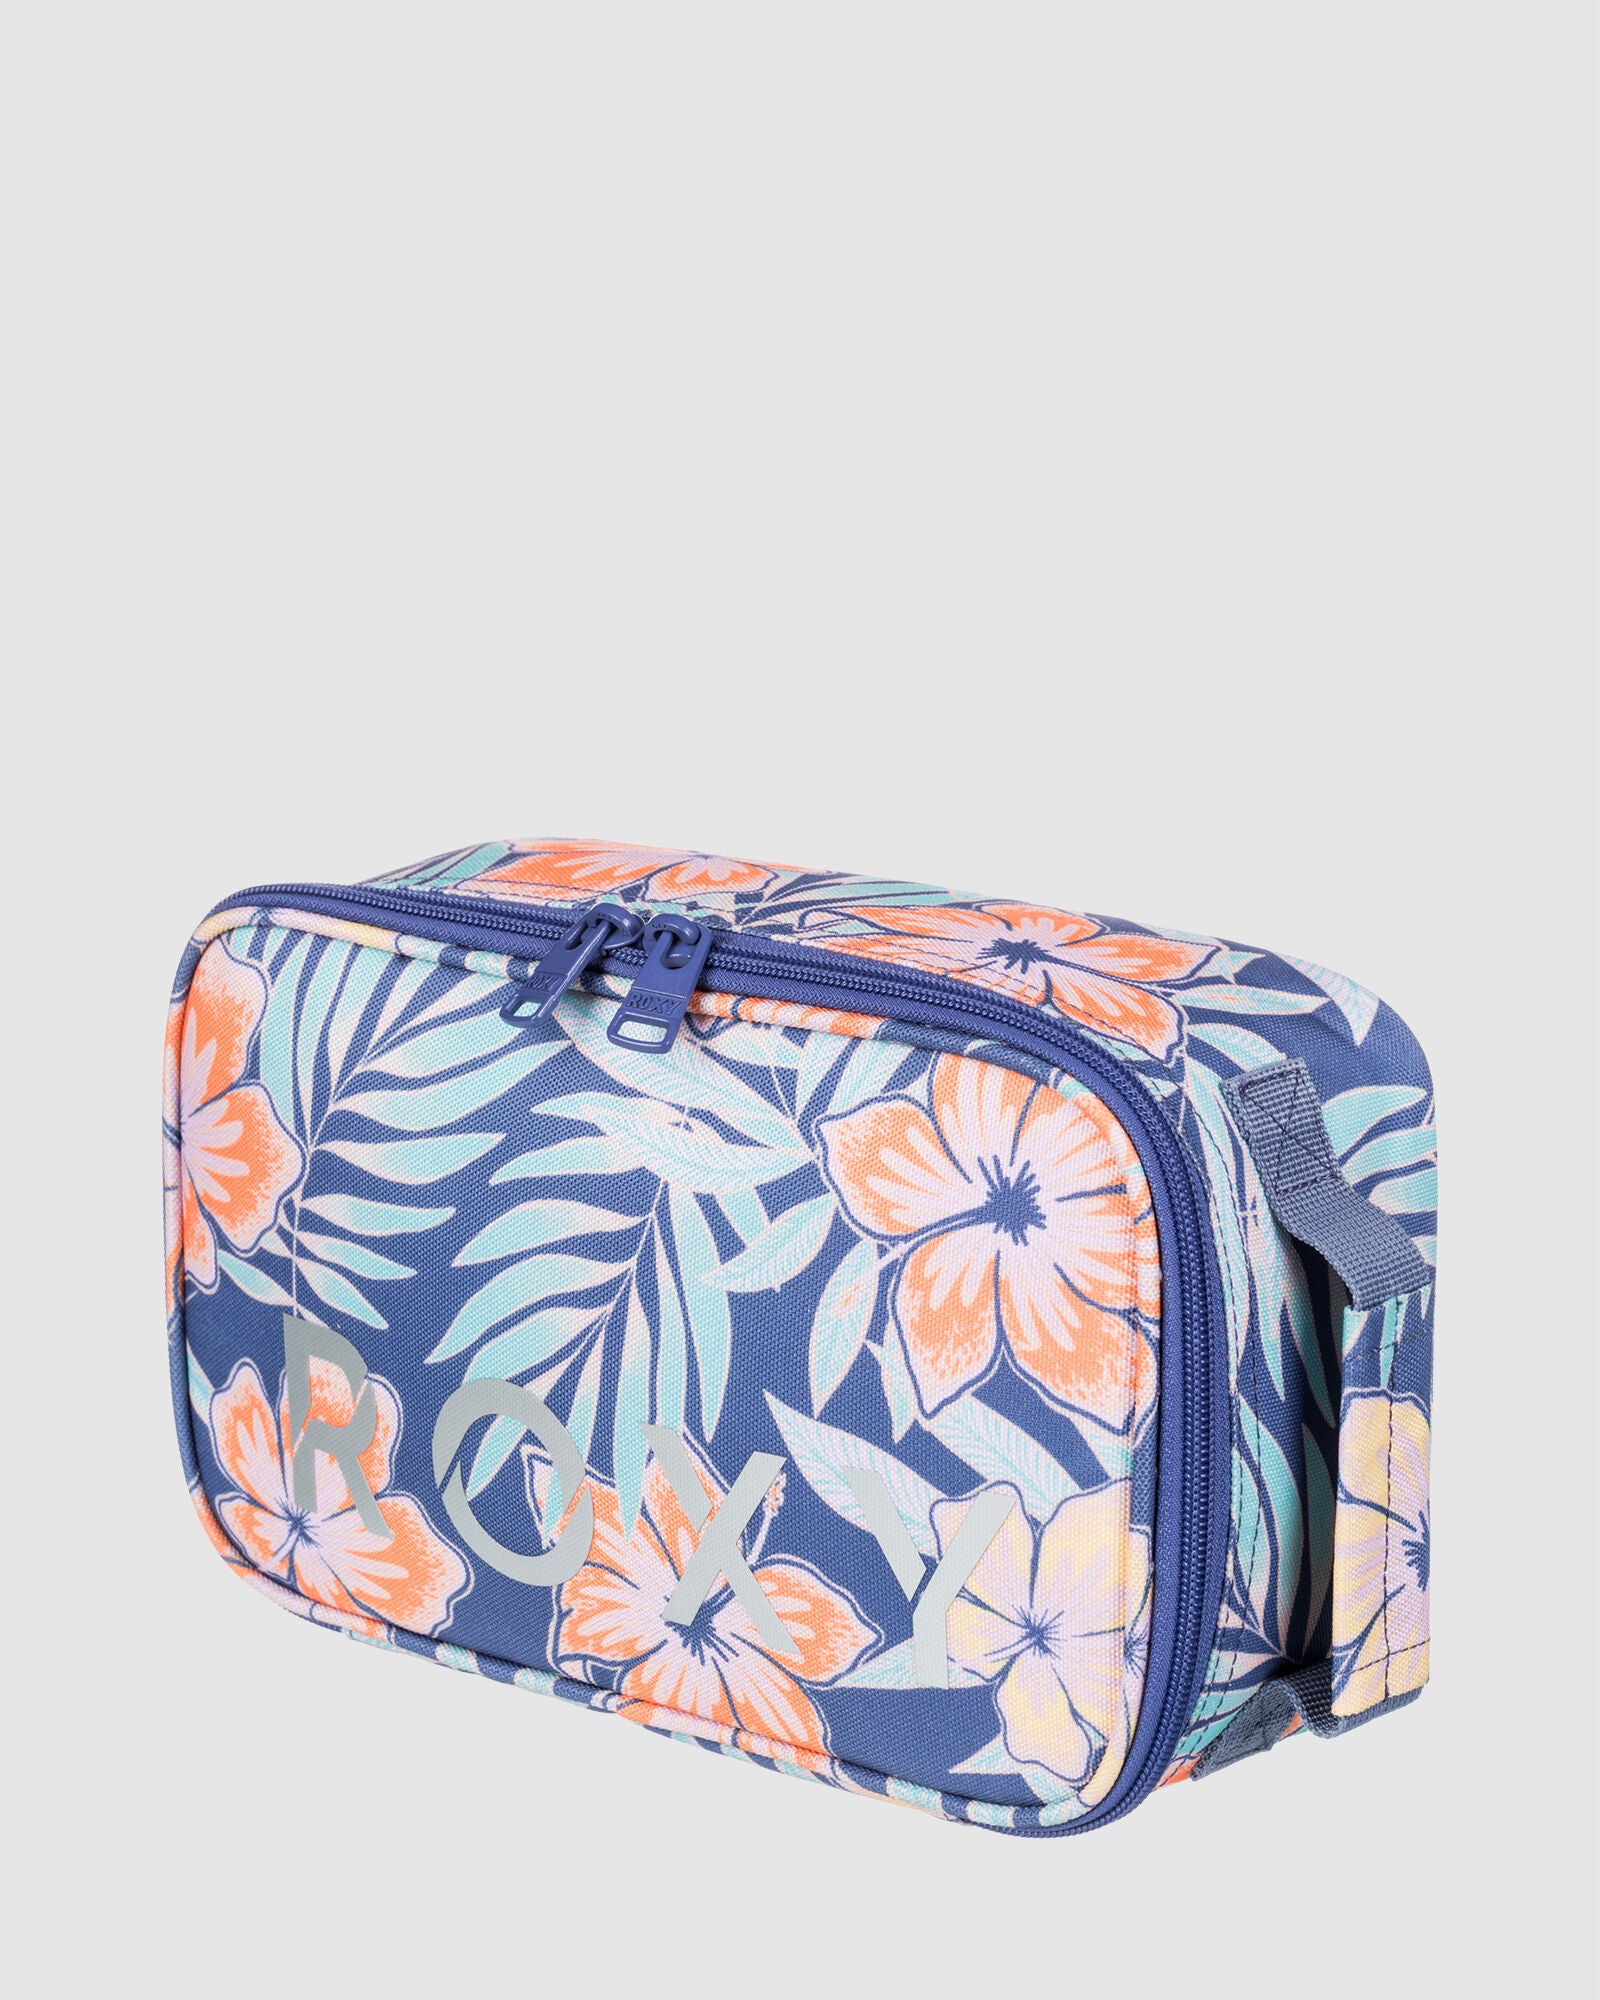 GROOVY LIFE MARLIN FUNKY PALM ROXY LUNCHBOX 3.5L BACK TO SCHOOL LADIES ACCESSORIES